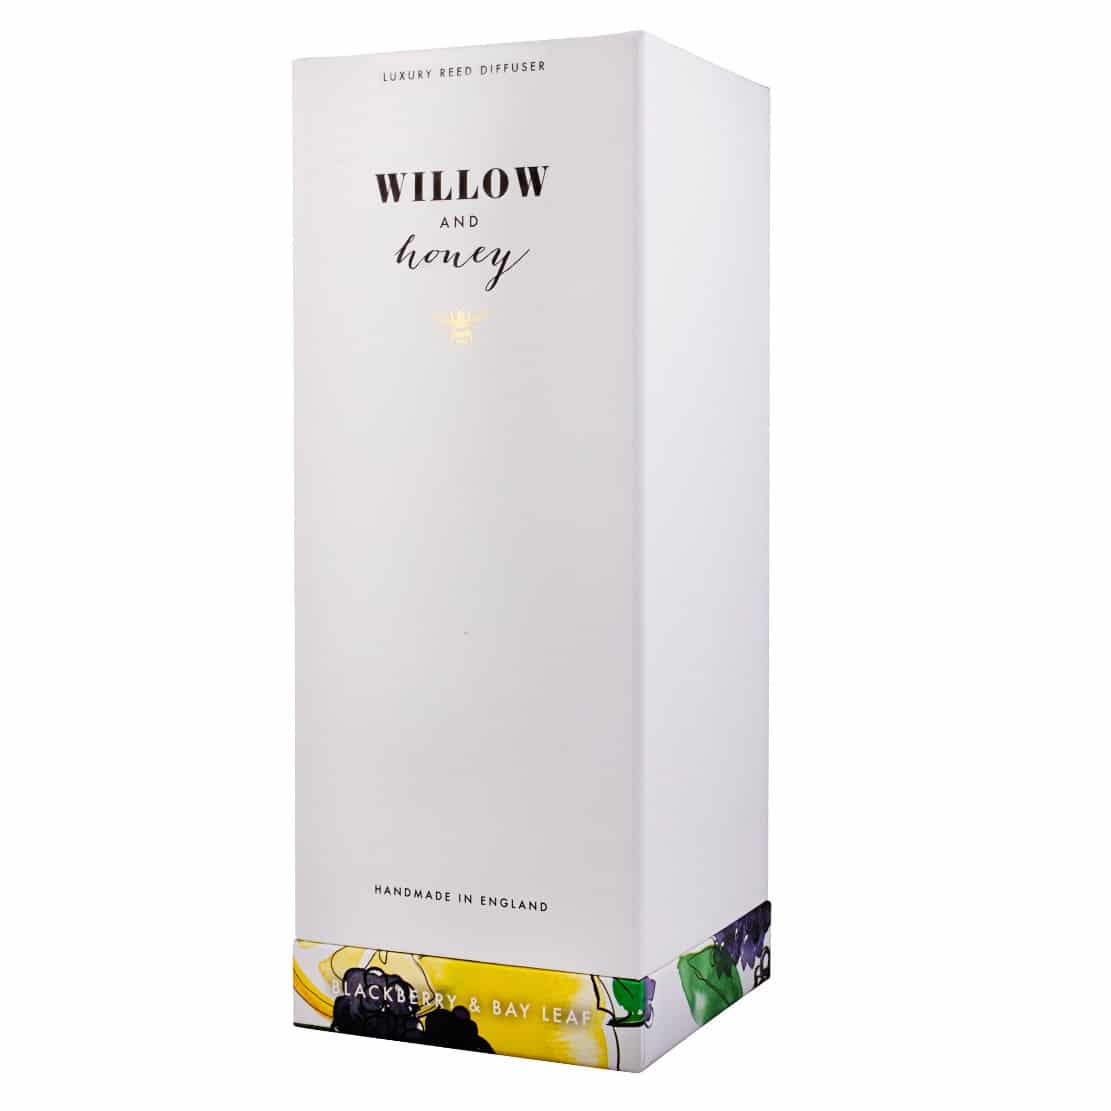 Willow and Honey Blackberry and Bay Leaf Diffuser 200ml